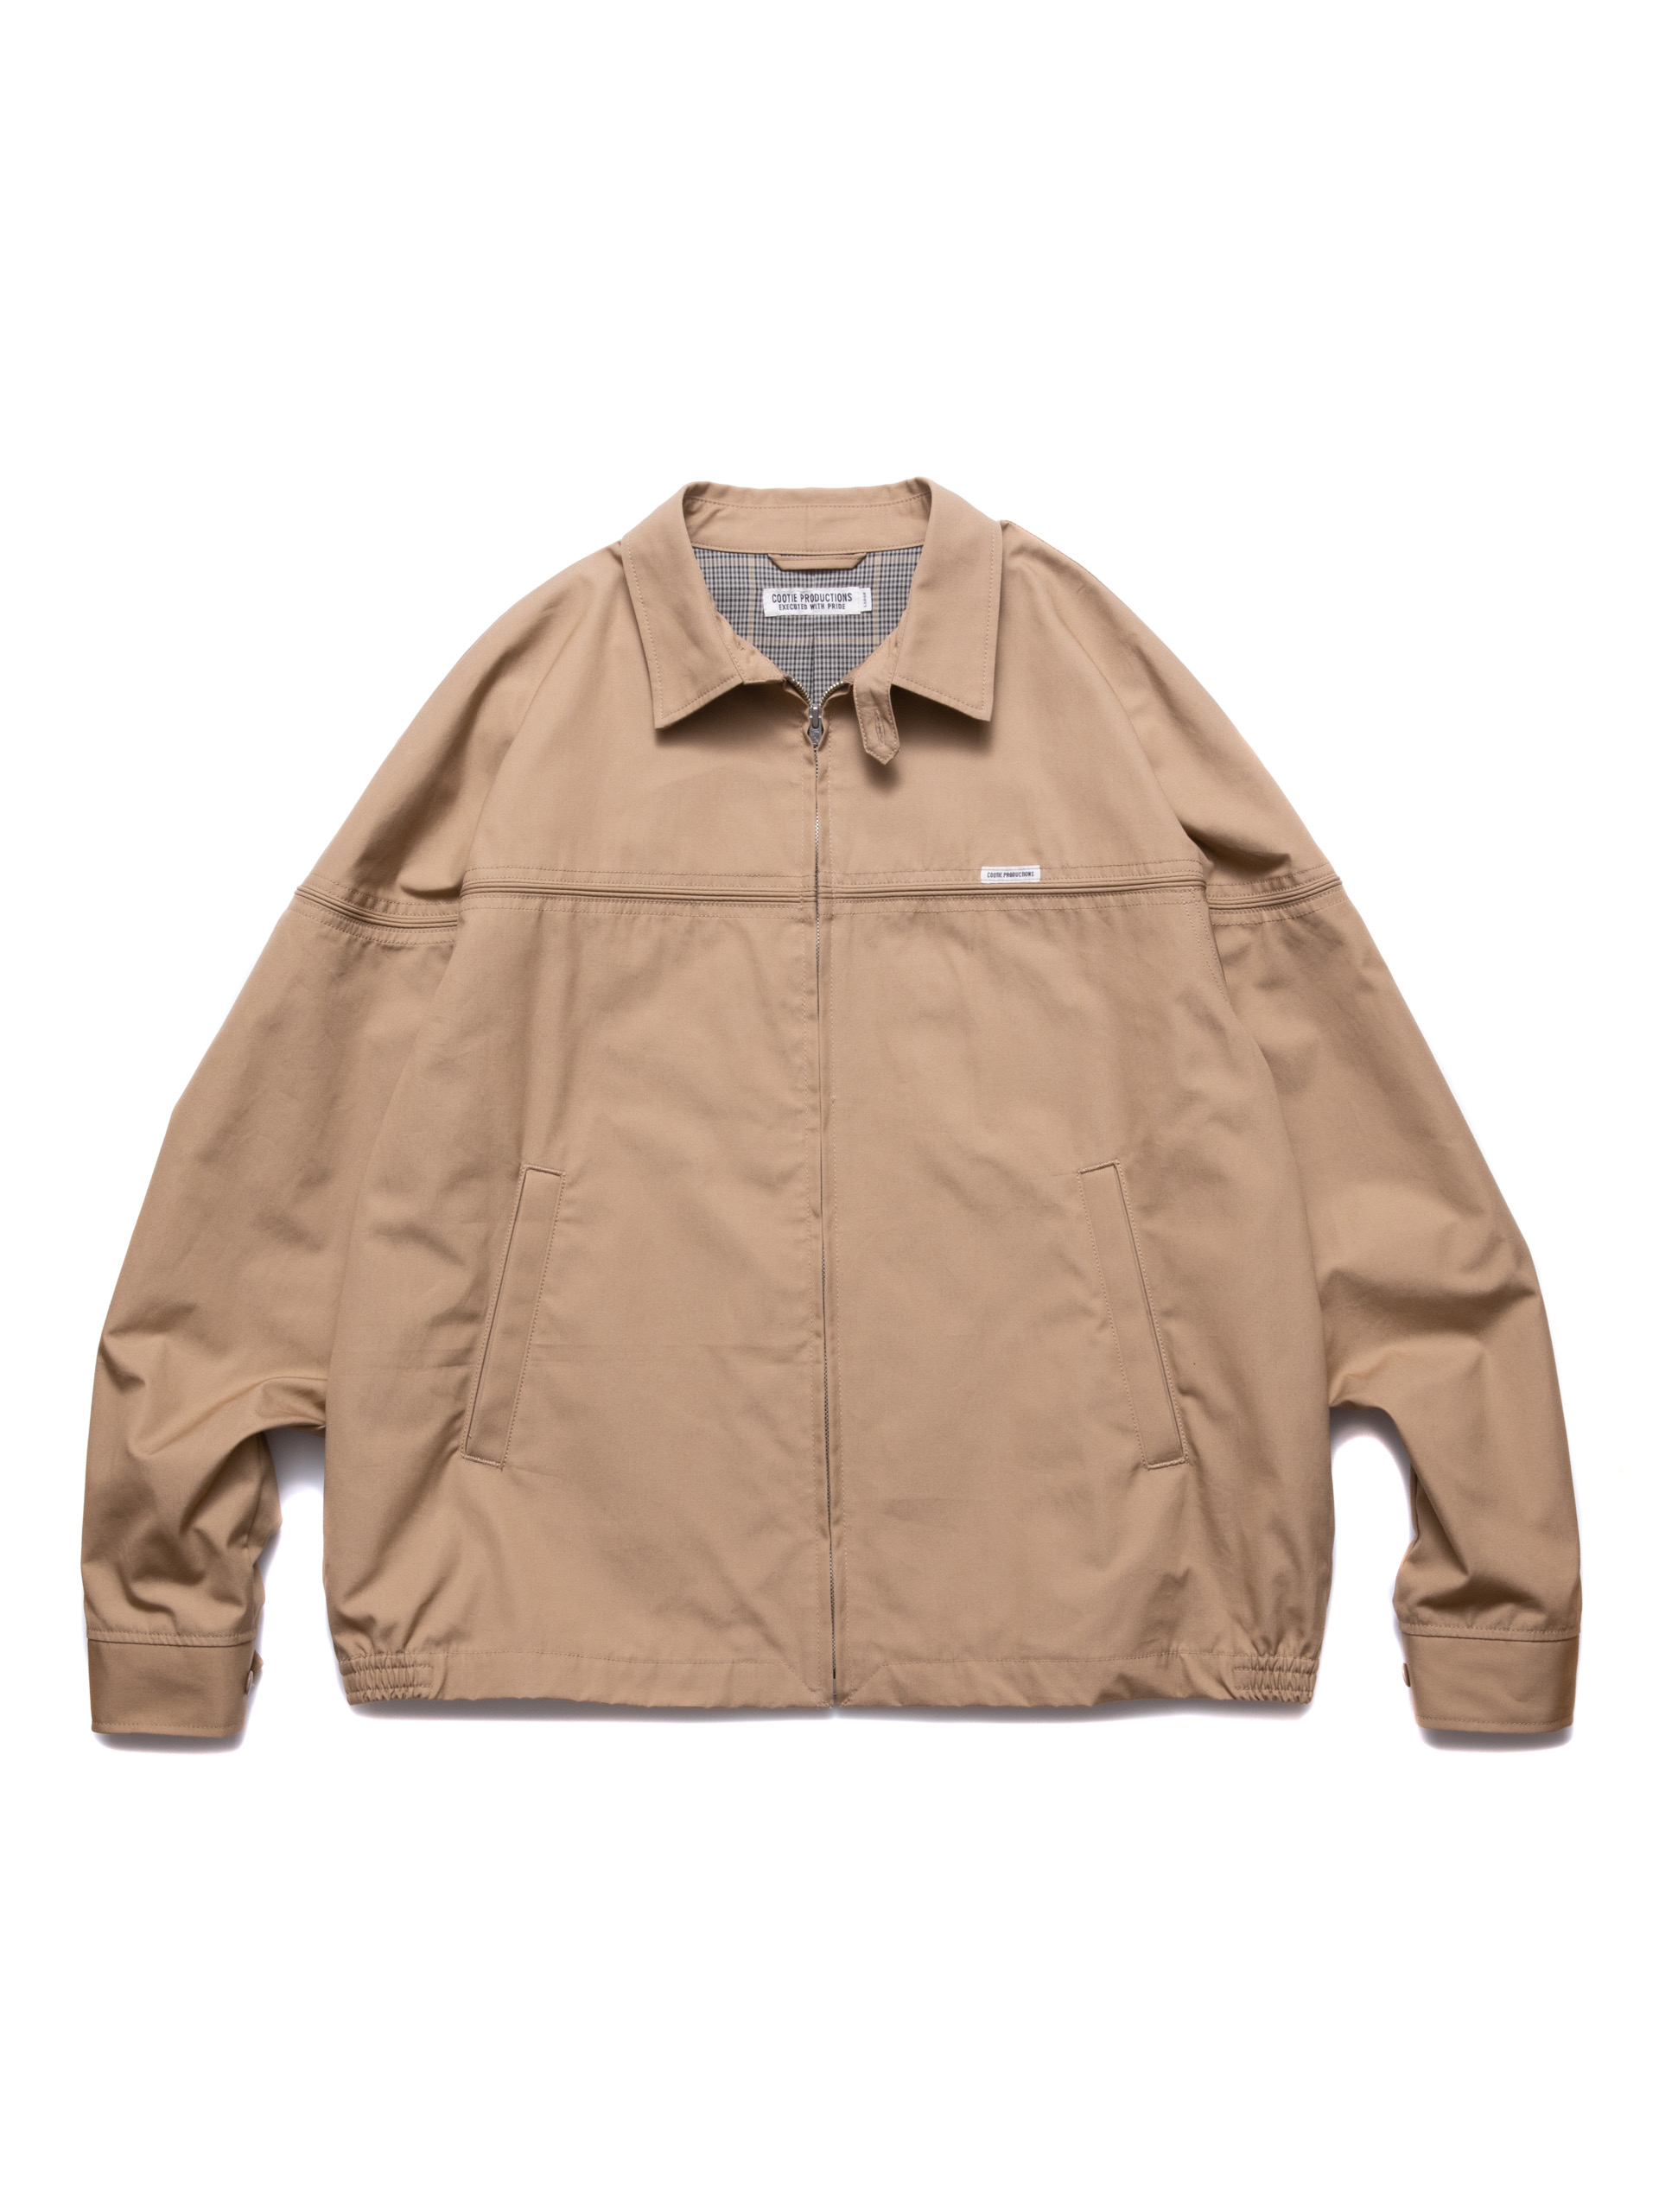 COOTIE クーティ Drizzler Derby Jacketメンズ